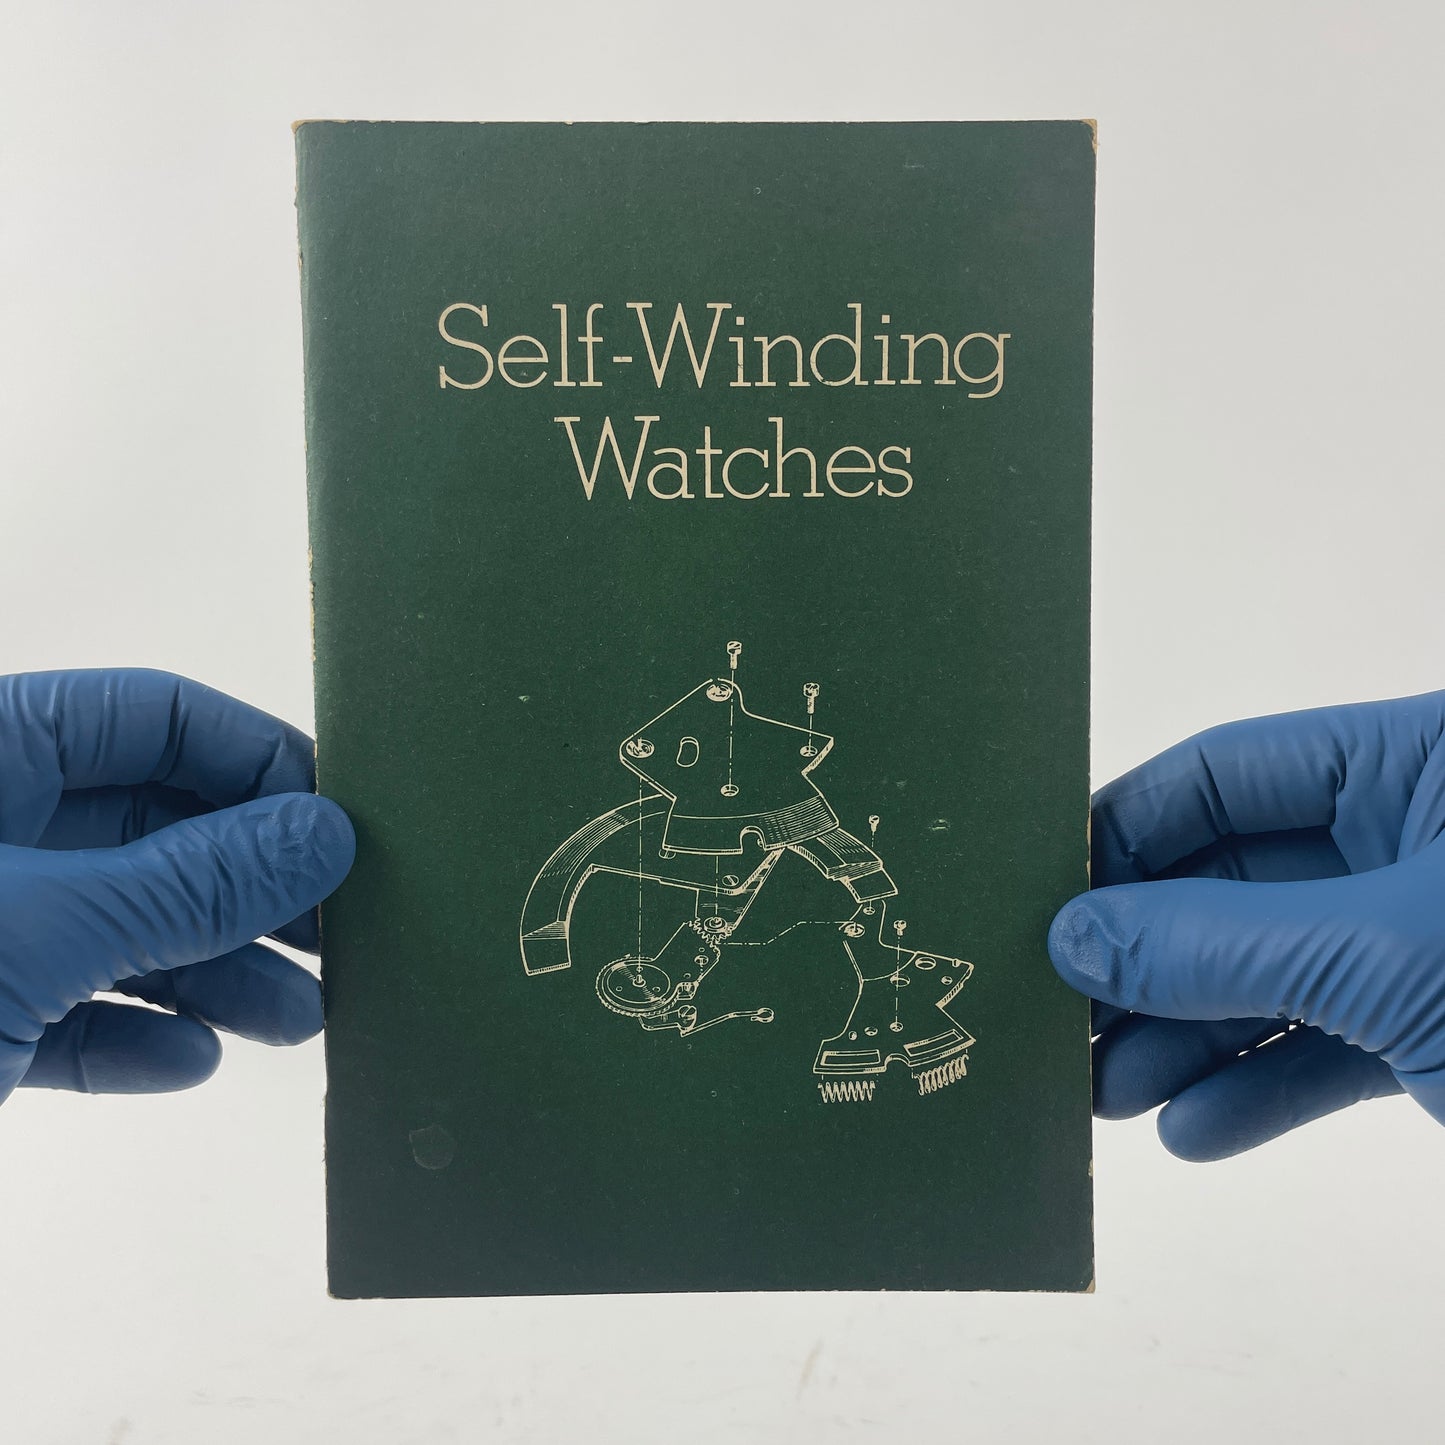 May Lot 39- Self-Winding Watches